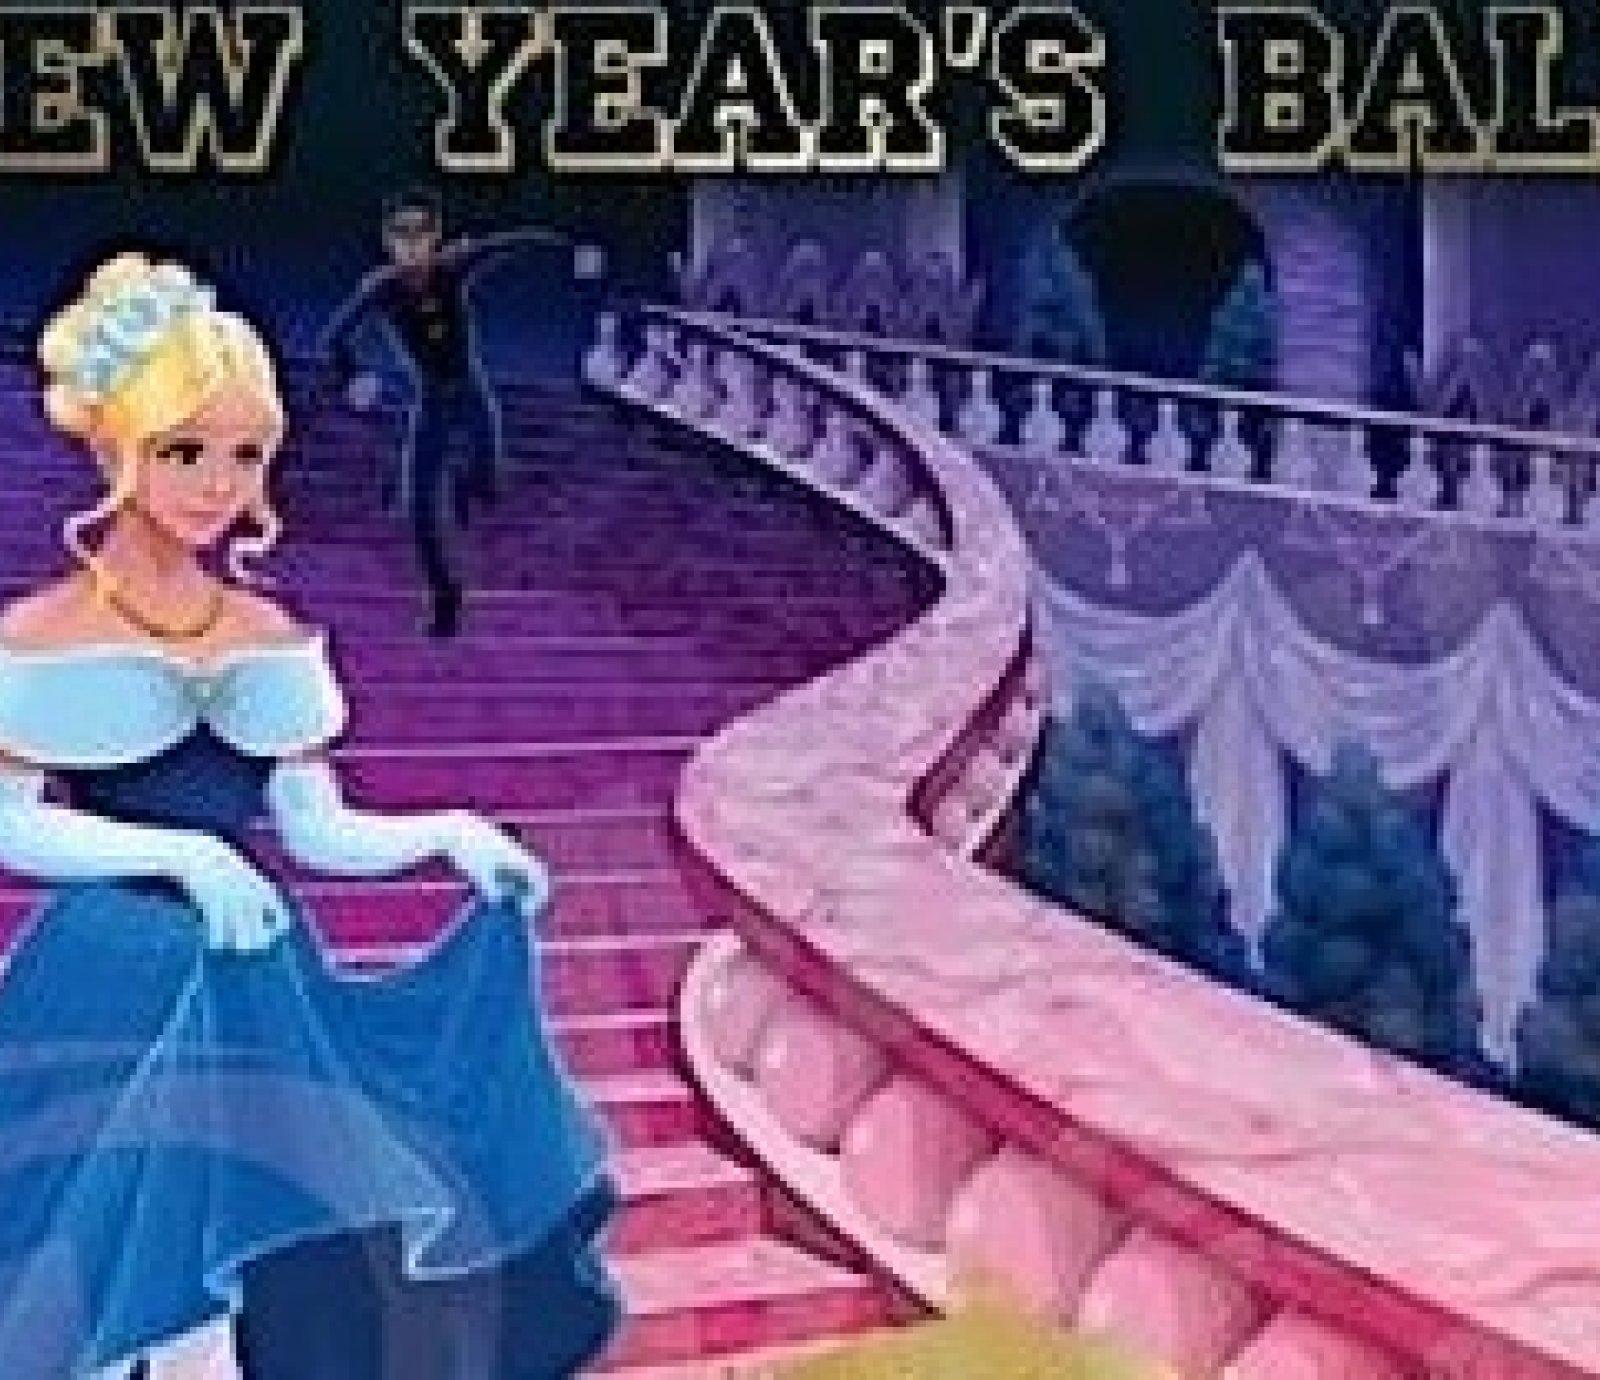 New Year's ball for Cinderella